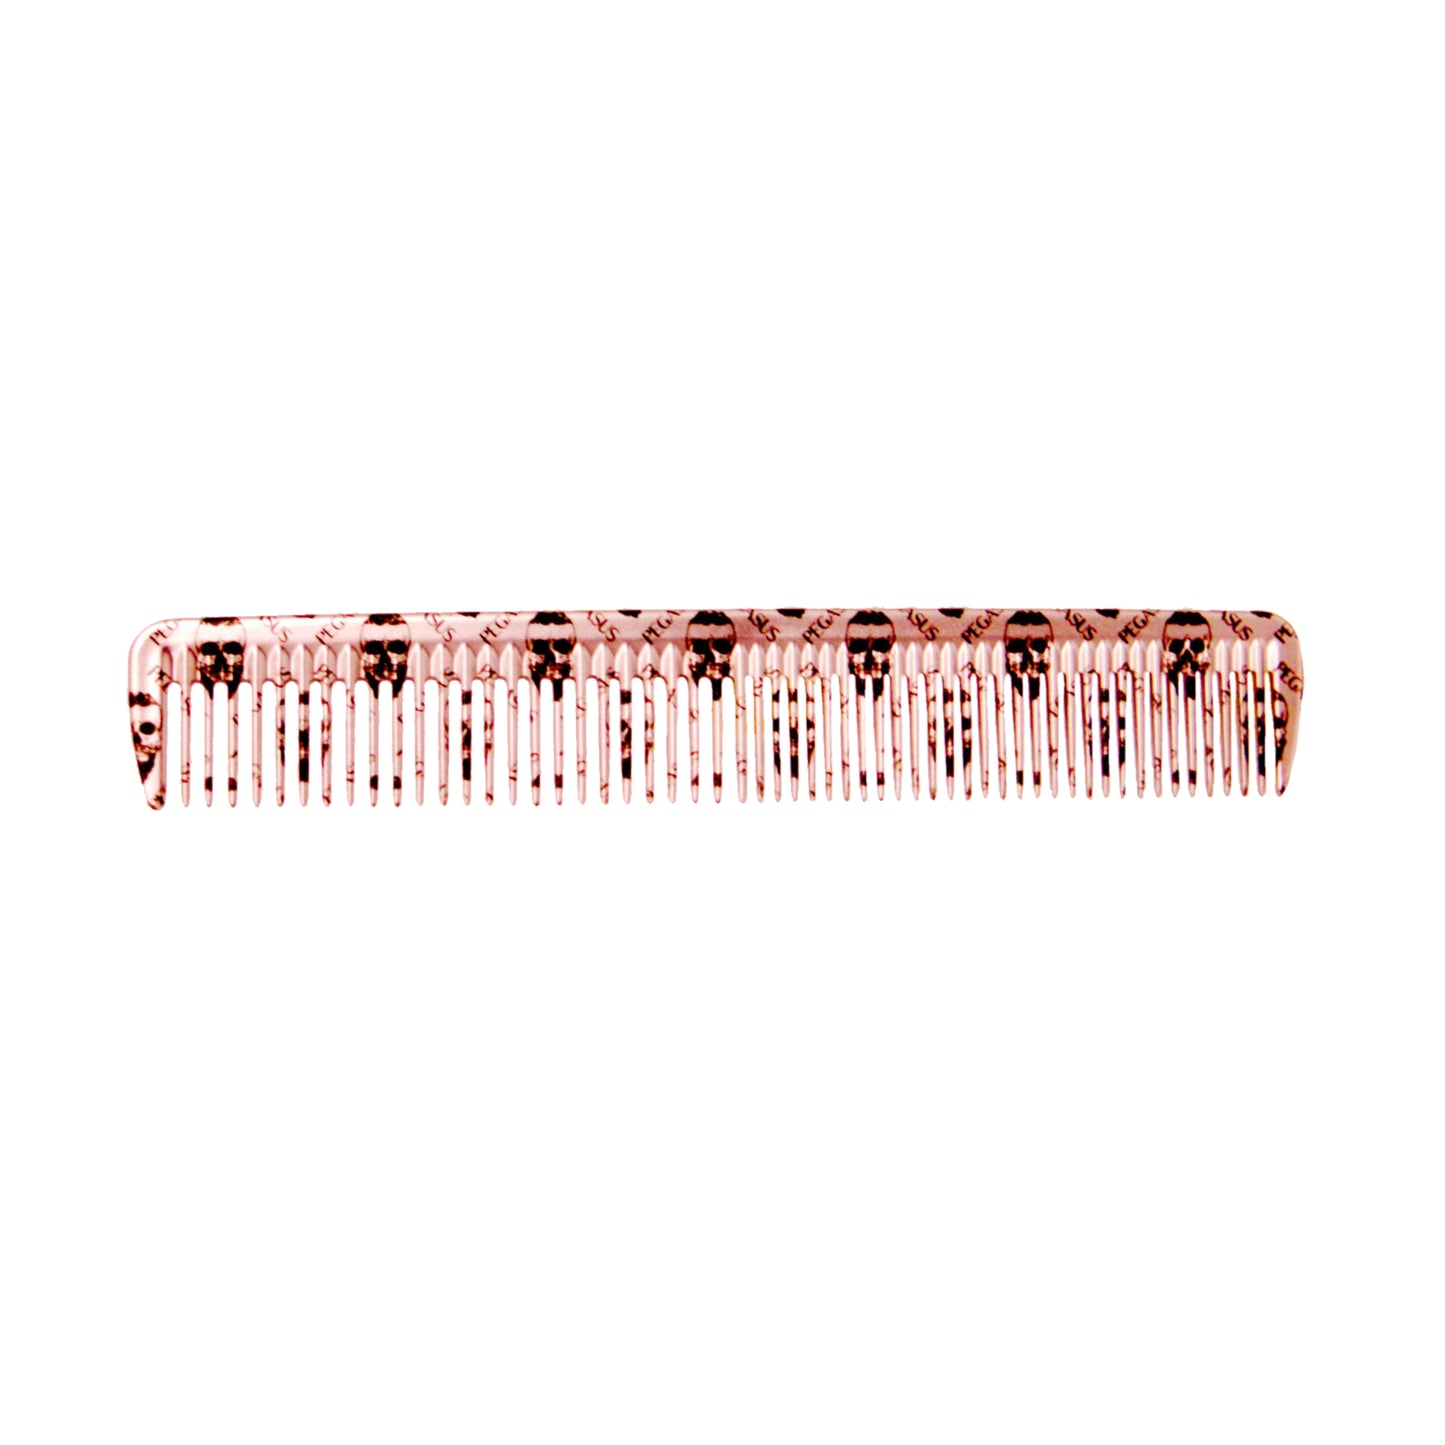 Pegasus Skulleto 202, 7in Hard Rubber Hair Detangling/Trimmer Course Tooth Comb,  Seamless, Smooth Edges, Anti Static, Heat and Chemically Resistant, Everyday Grooming Comb | Peines de goma dura - Silver